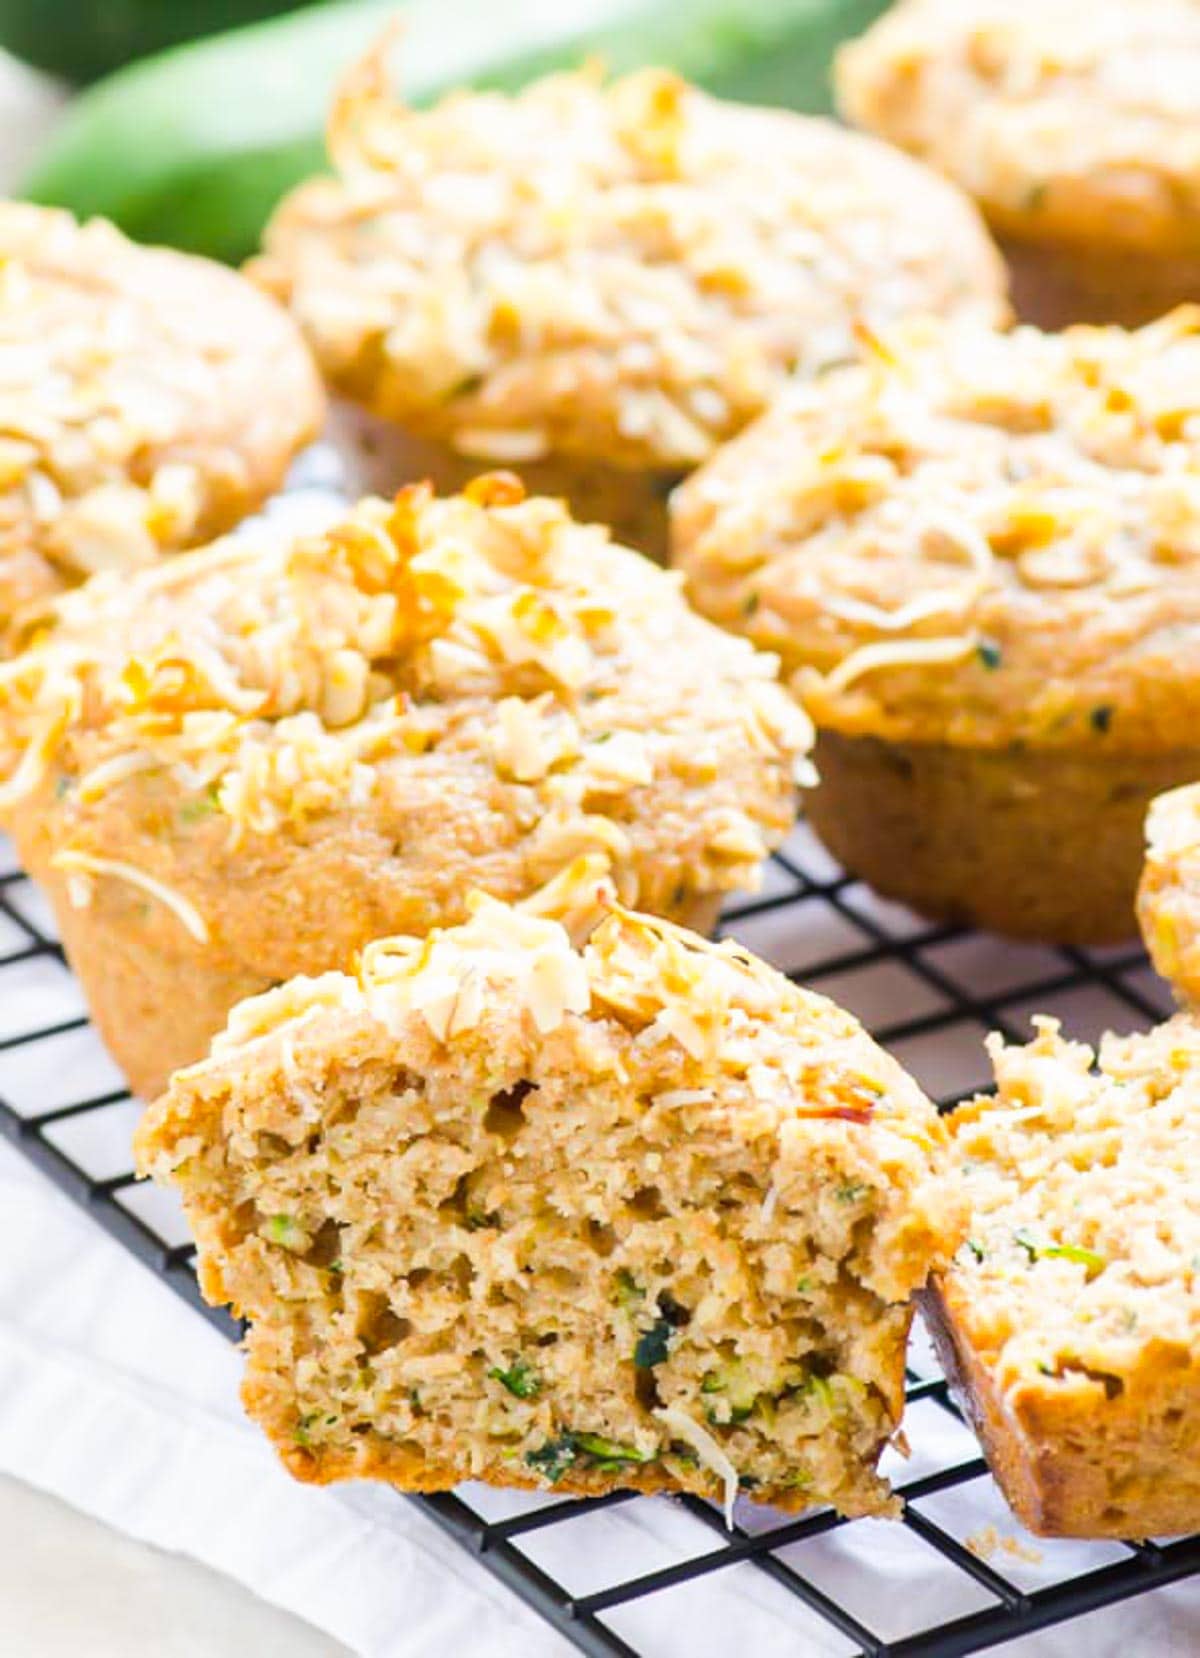 Healthy lemon zucchini muffins on baking rack with one muffin split open.